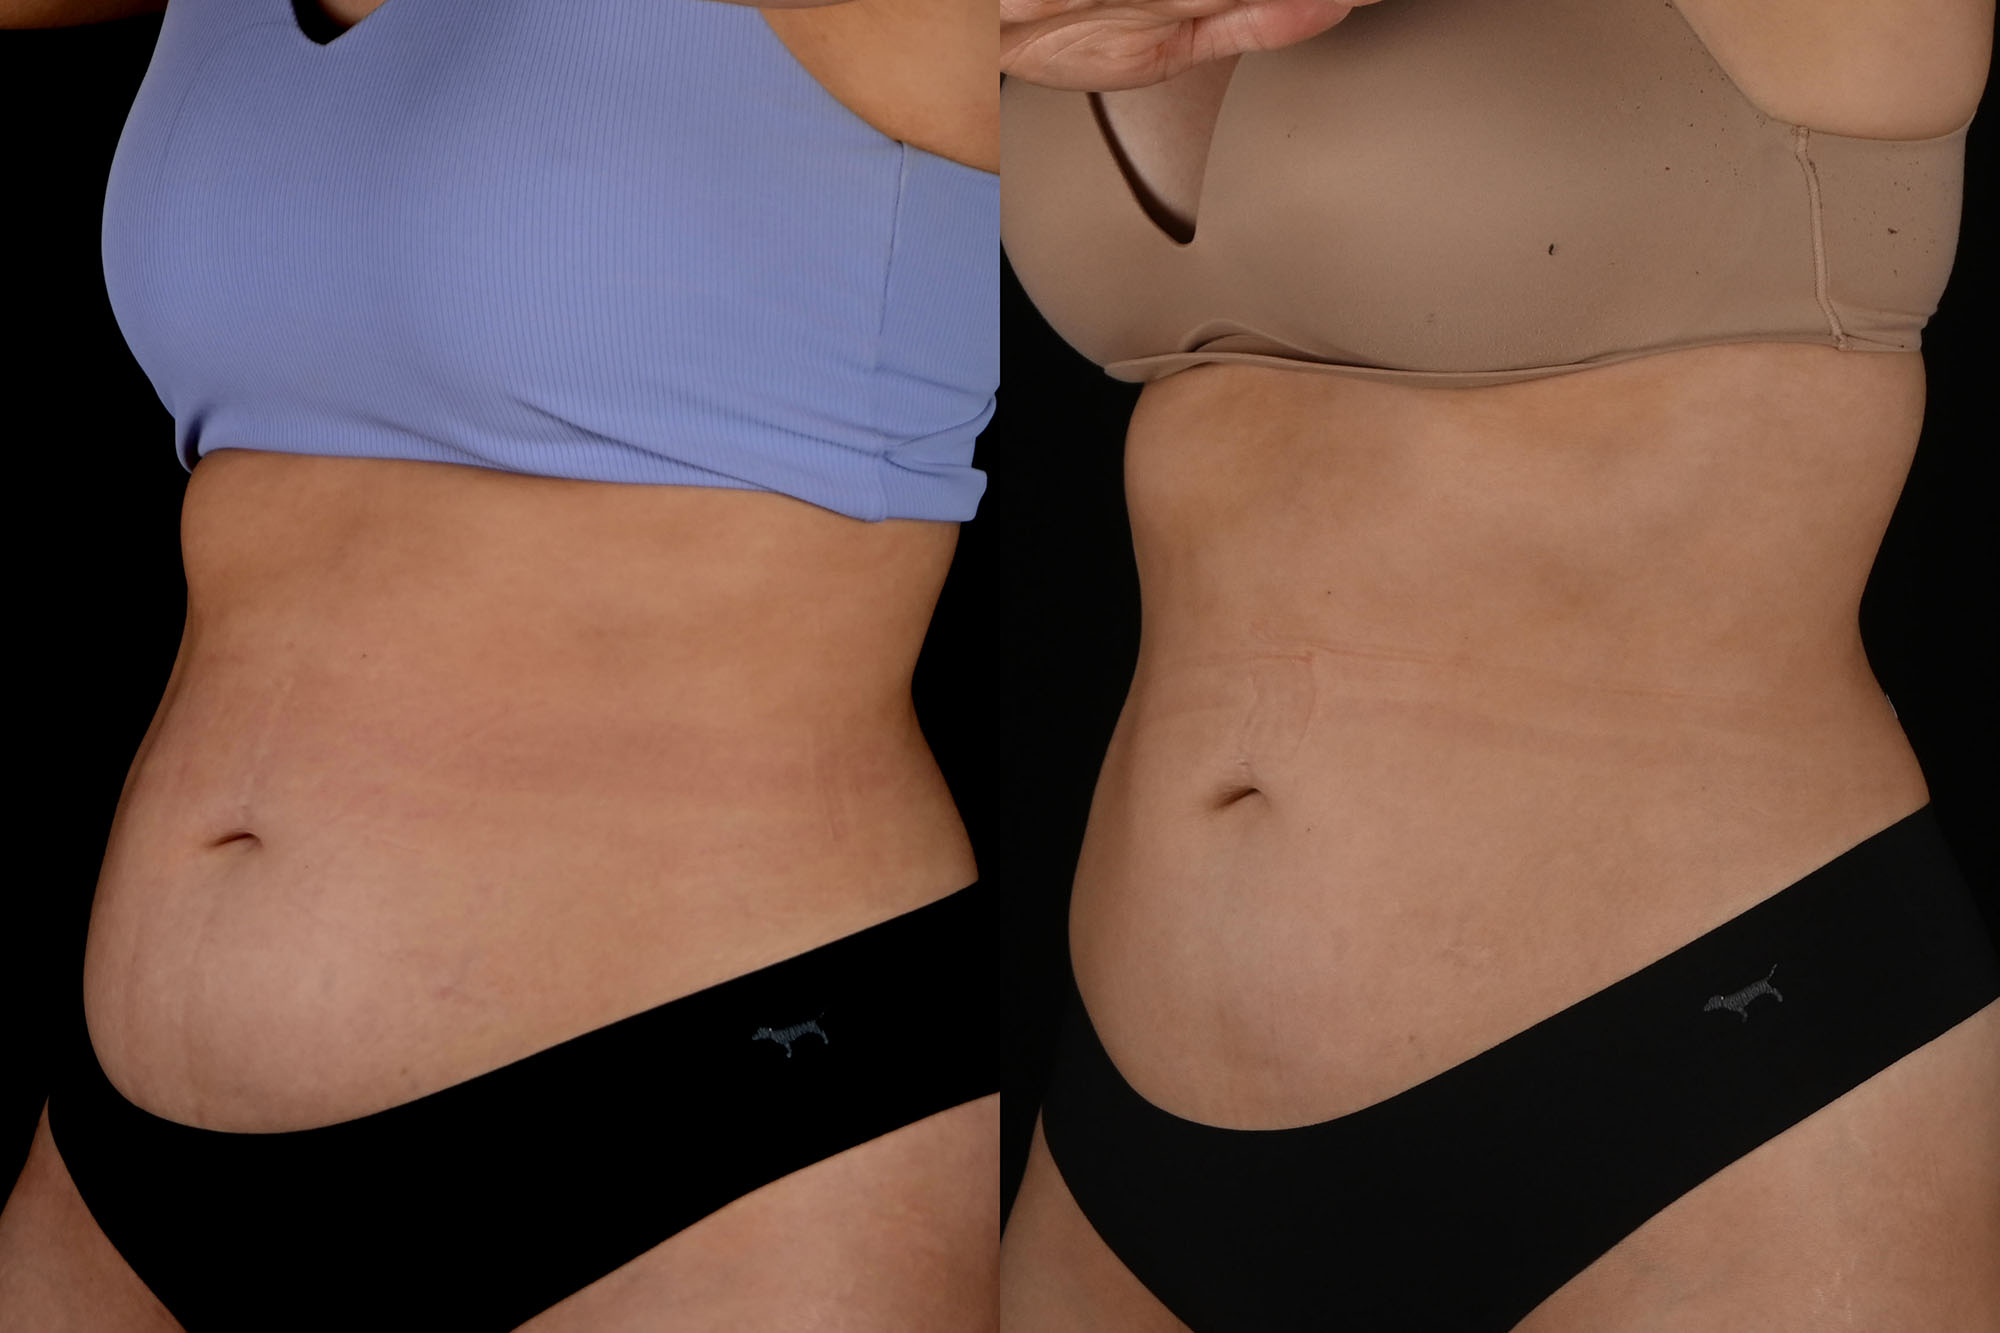 Before and After photo of 3/4 view of women showing smaller stomach after truBody treatments.